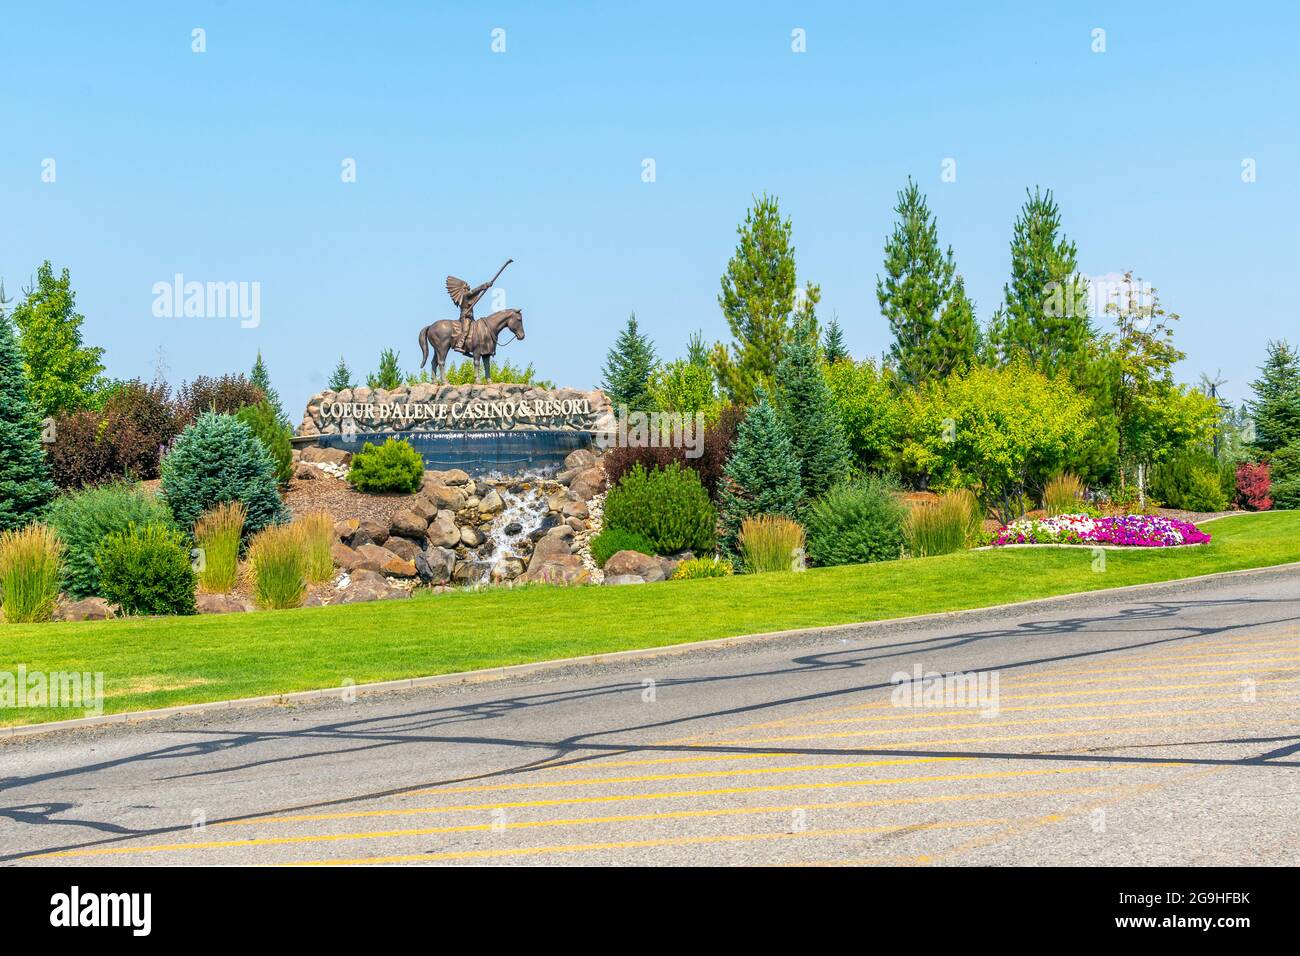 General view of the Coeur d'Alene Casino welcome sign on July 13 2021 in the rural town of Worley, Idaho, USA. Stock Photo